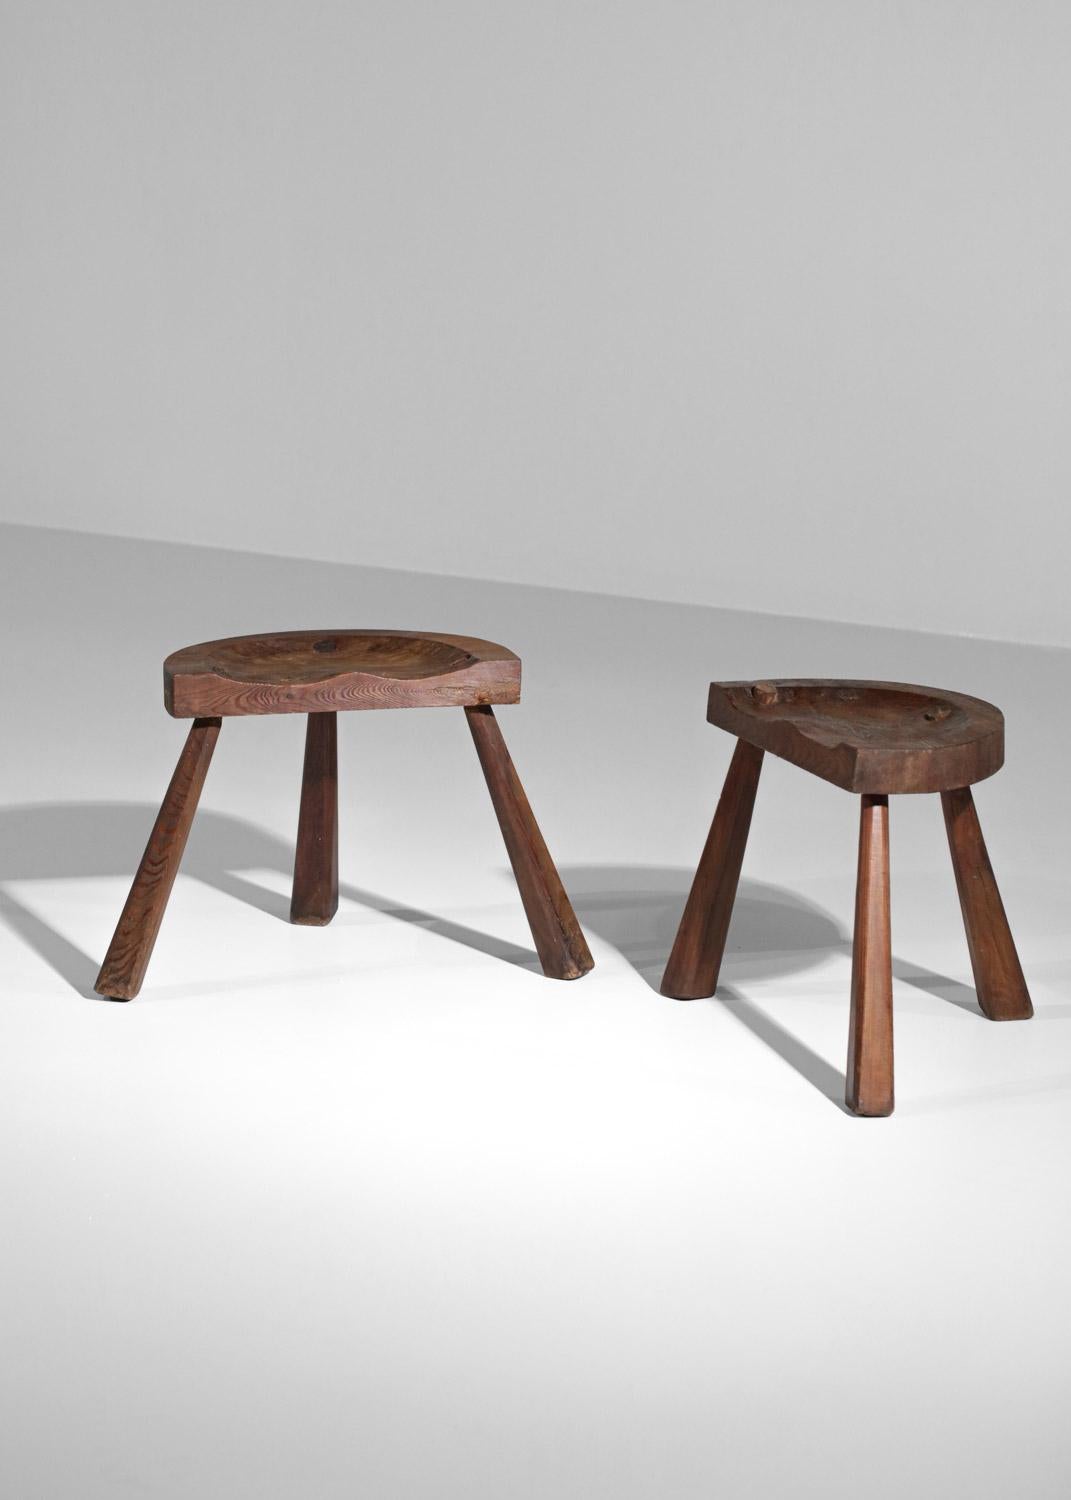 Set of two rustic vintage stools with a brutalist design in the taste of Jean Touret's work. Handcrafted work done with a gouge to carve the solid oak structure and the tripod legs. Beautiful patina of time on the wood (see photos).